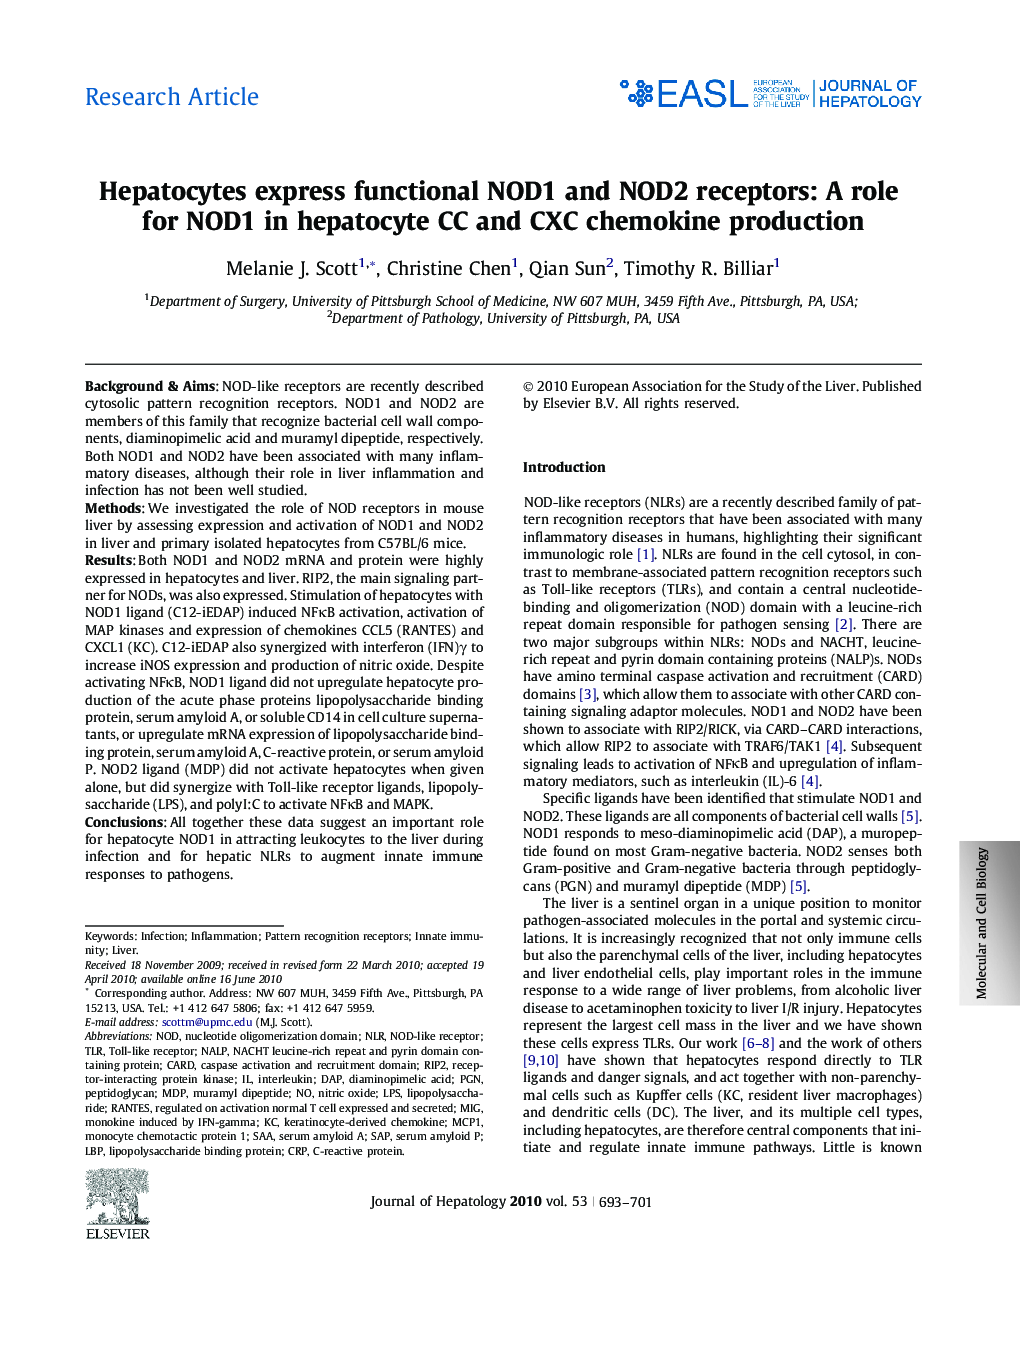 Research ArticleHepatocytes express functional NOD1 and NOD2 receptors: A role for NOD1 in hepatocyte CC and CXC chemokine production